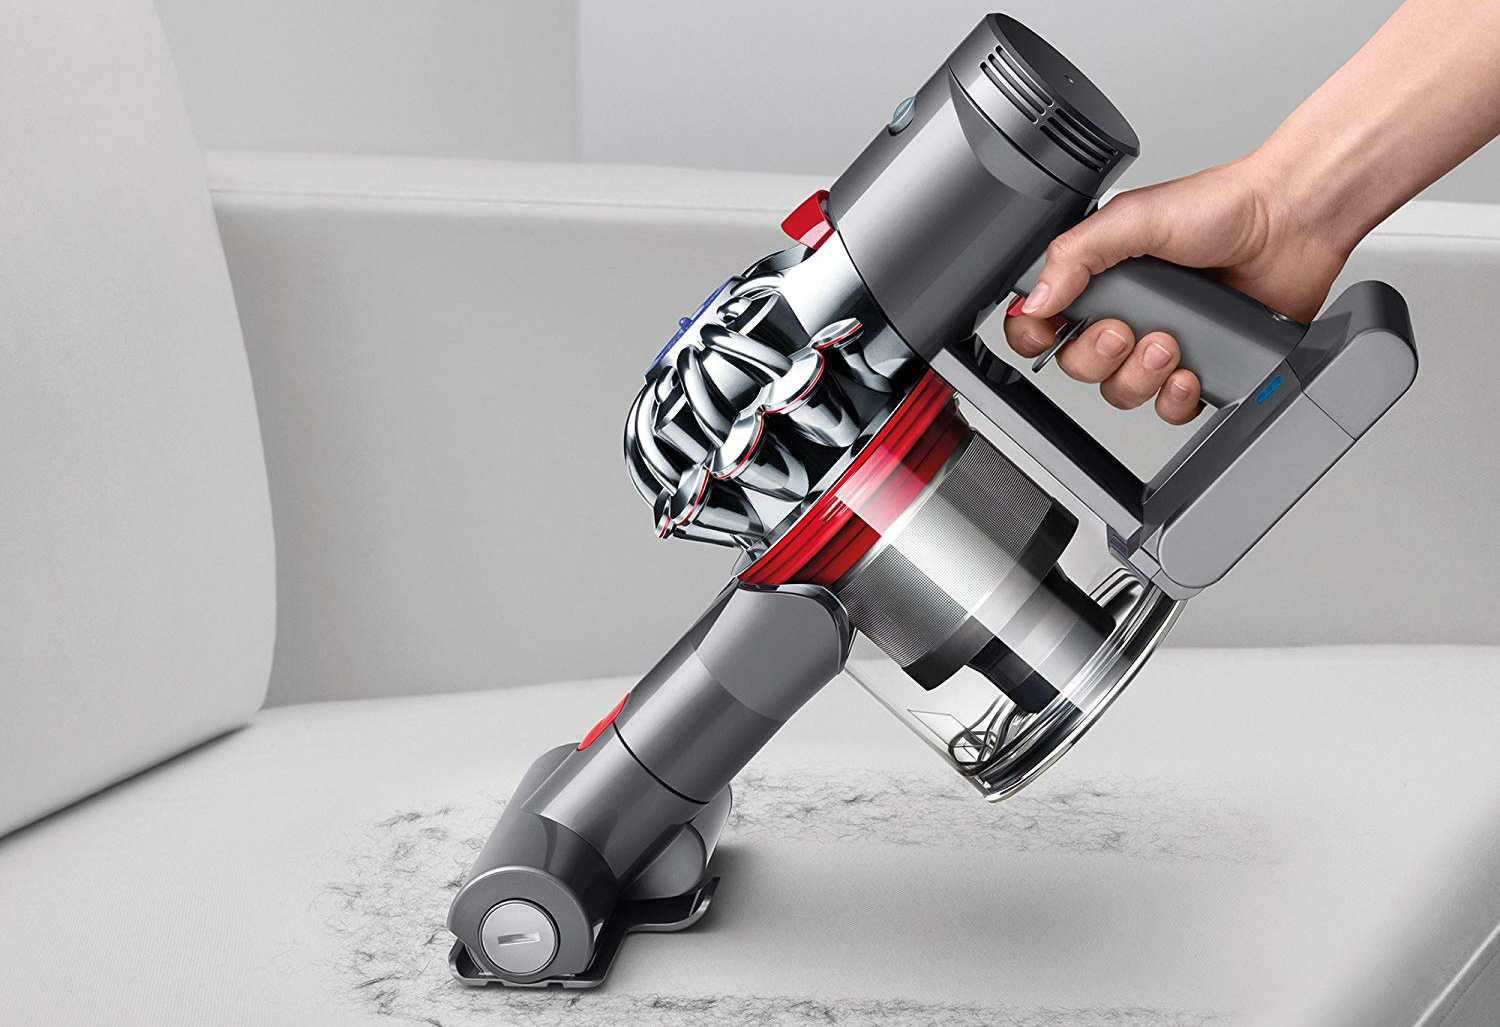 dyson vacuum cleaner deals on amazon v7 trigger cord free handheld 1